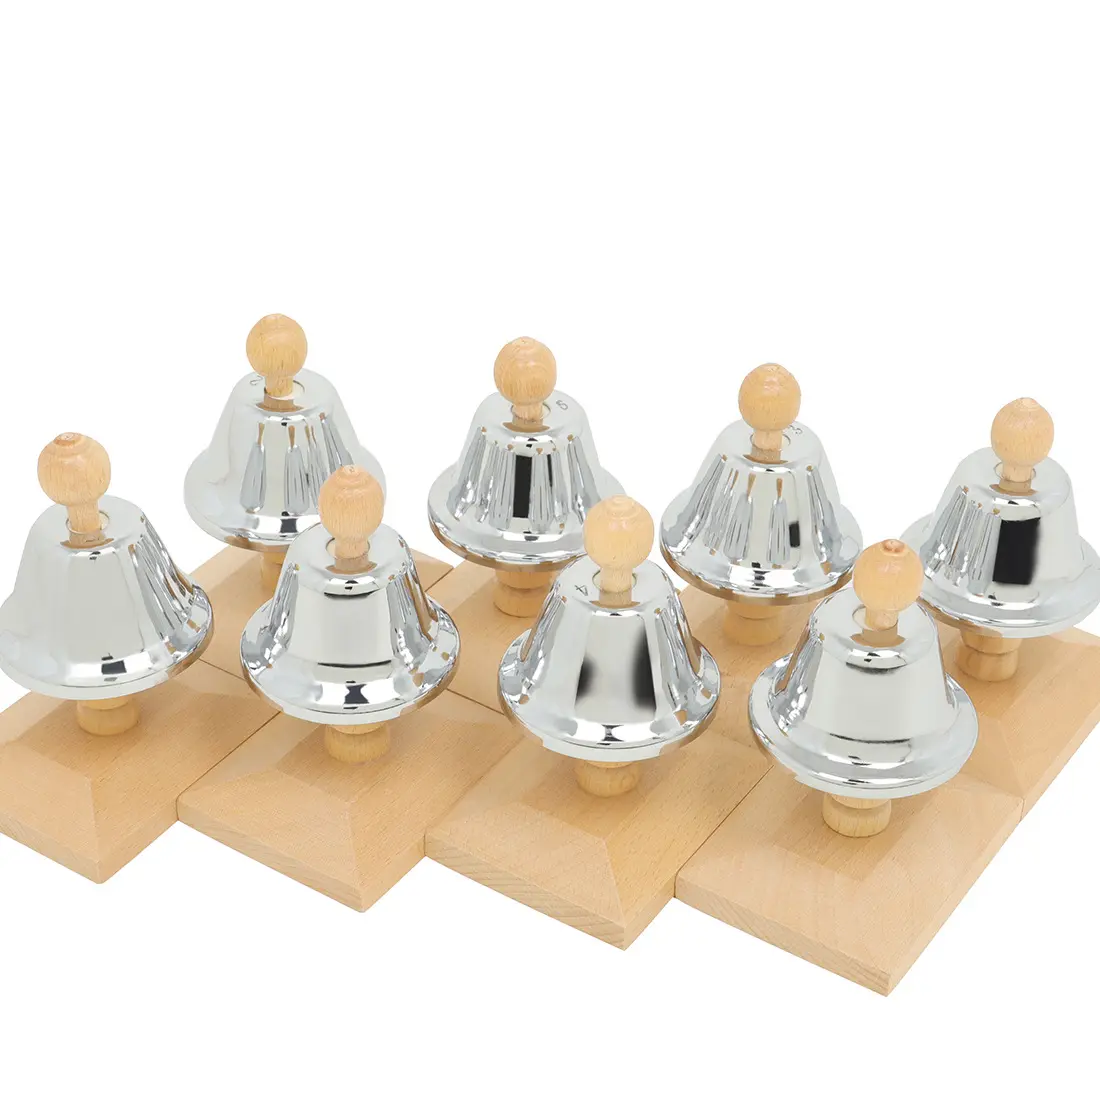 Olff high quality hot sale colour 8 note beech base children's play education toy suit press metal hand bell